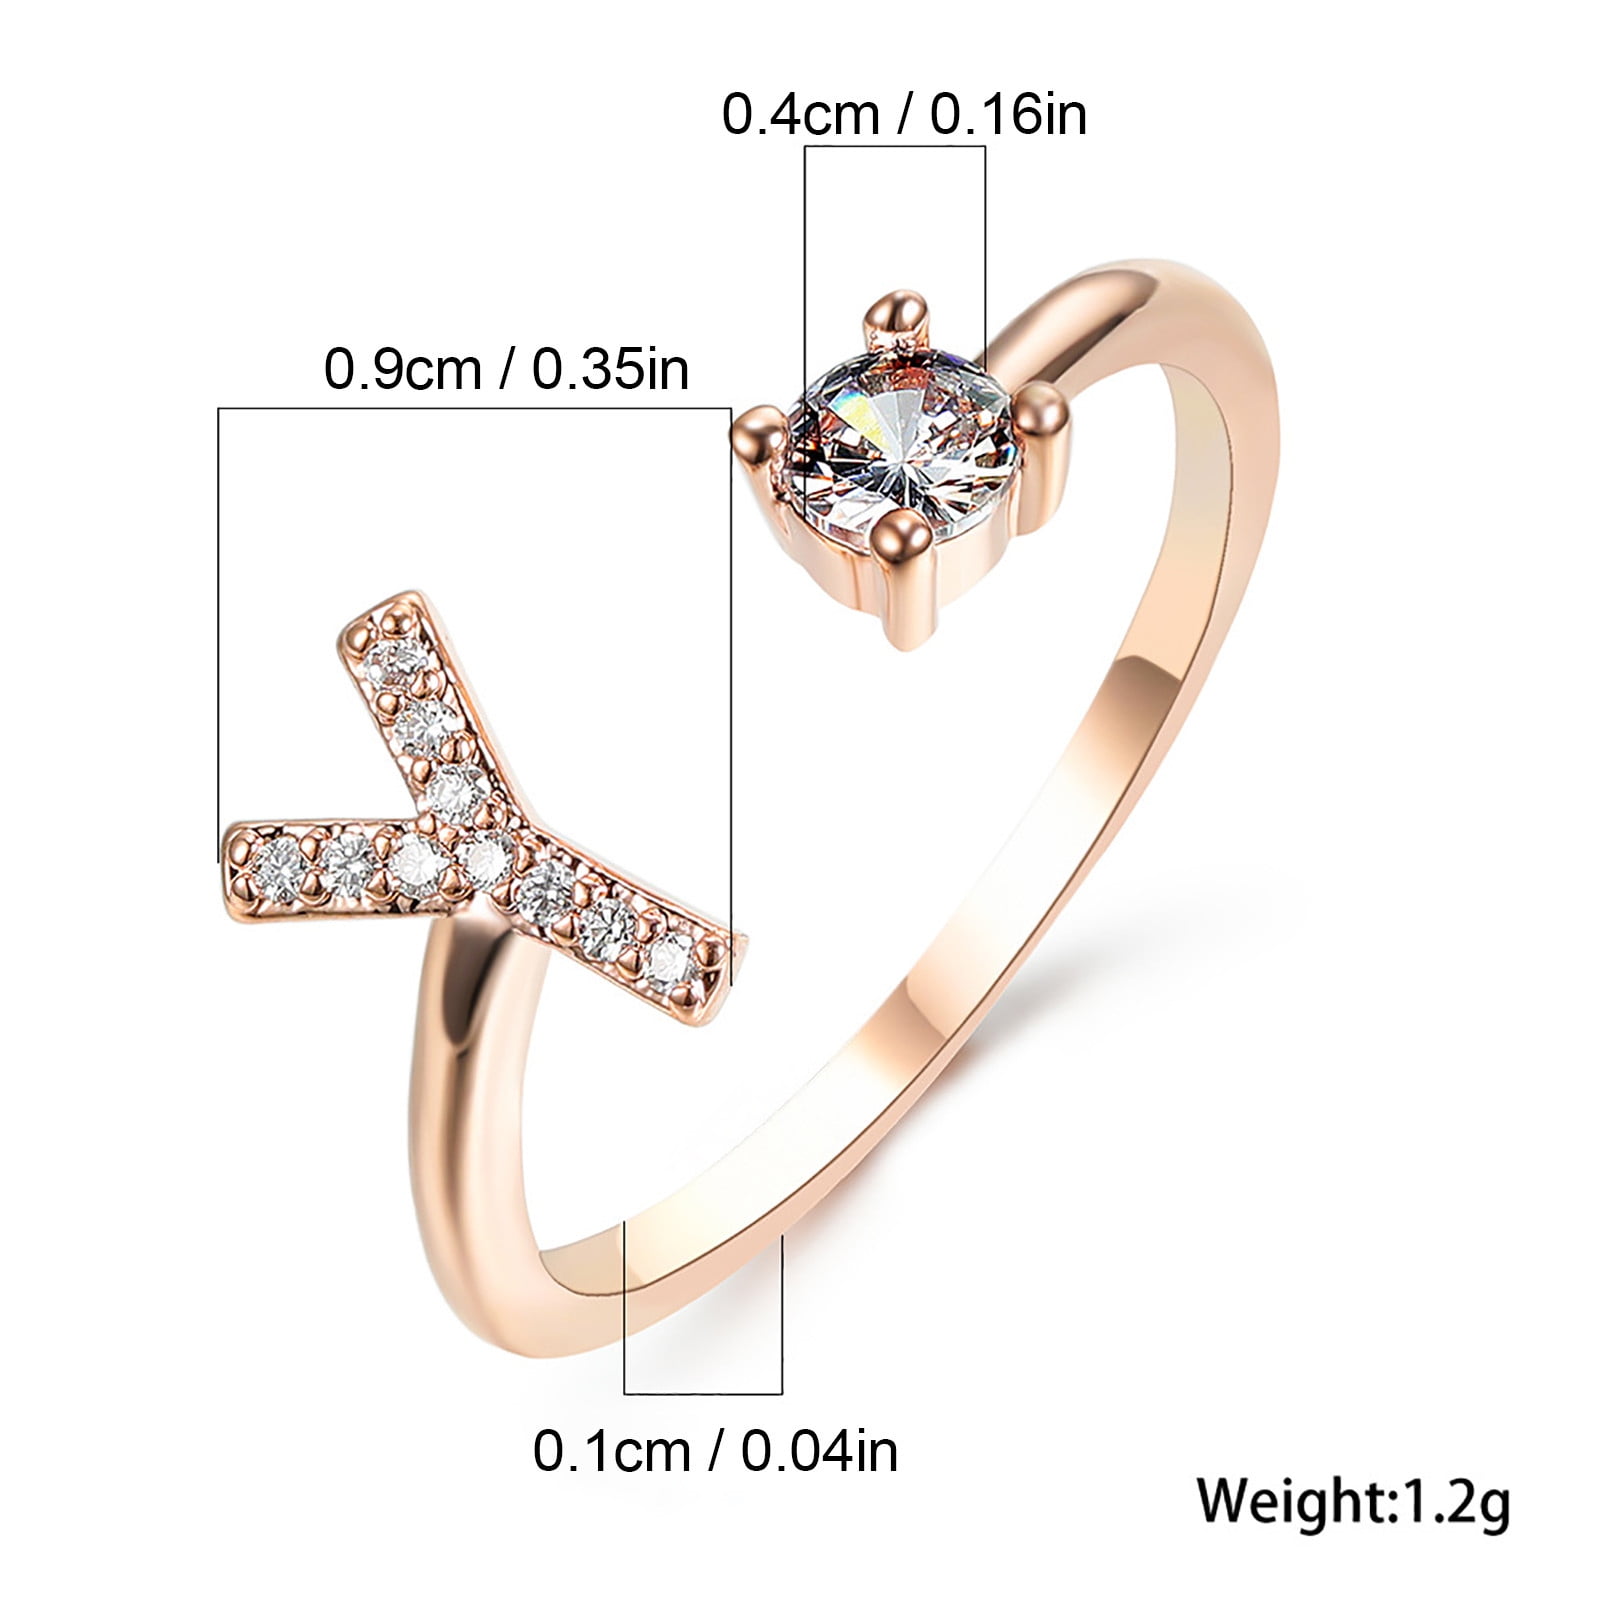 The 5 Safest Engagement Ring Designs If You're Shopping Without Your  Girlfriend - Poggenpoel